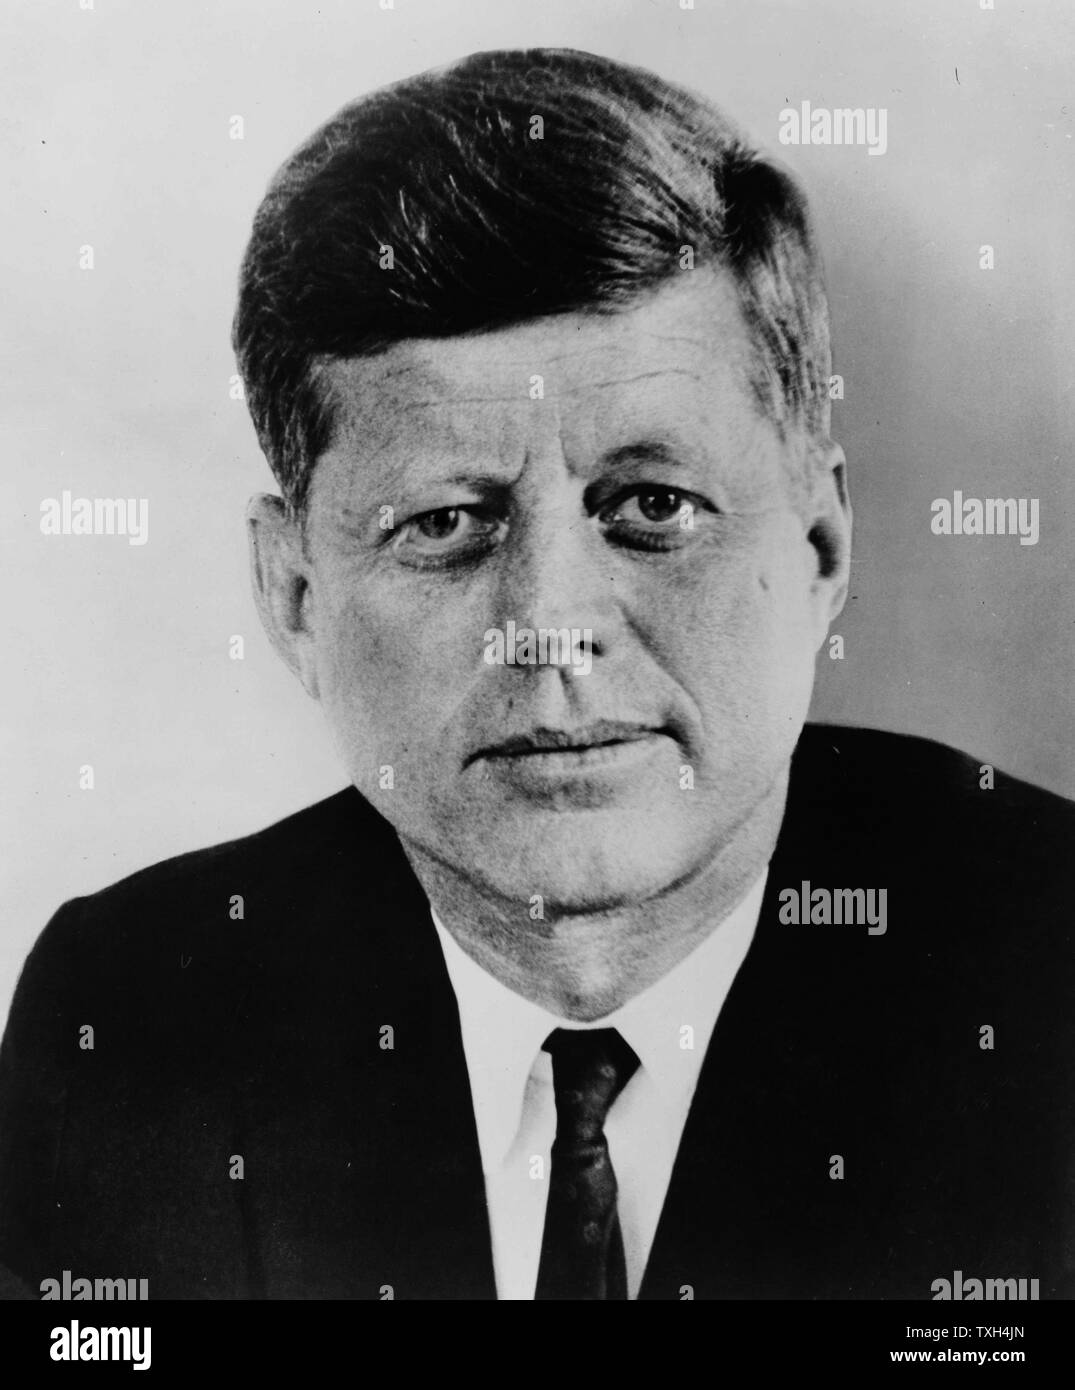 John Fitzgerald Kennedy, 35th President of the United States, serving from 1961 until his assassination in 1963. Stock Photo